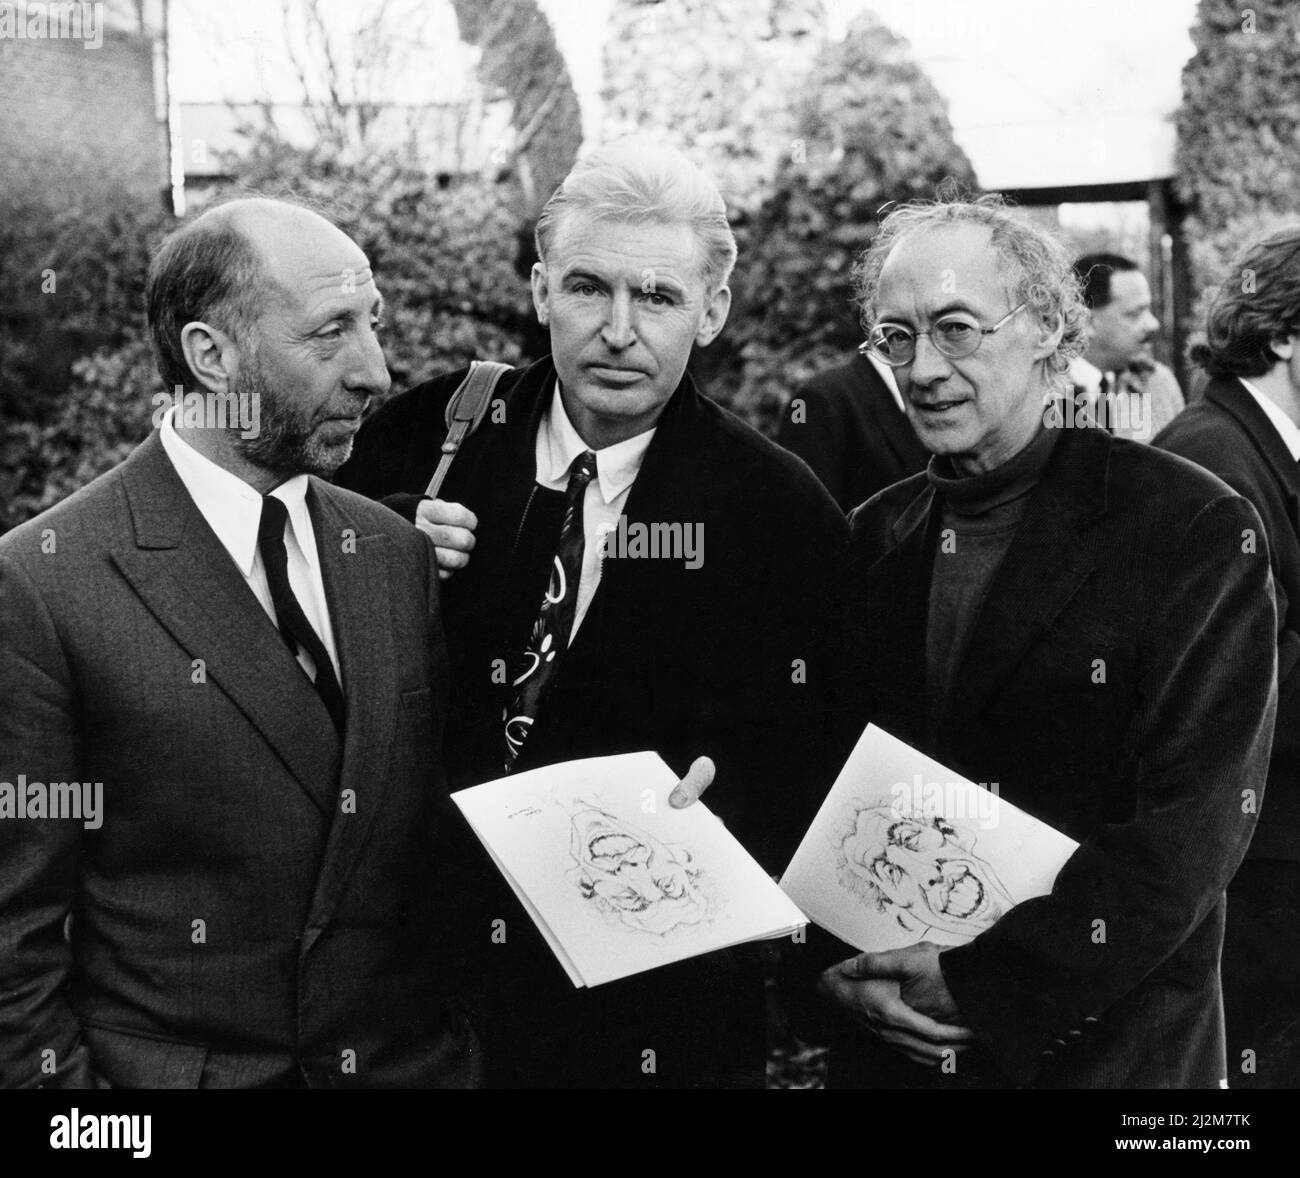 Together for the funeral of John Hewson at Springwood Crematorium are members of the former Liverpool pop group The scaffold: John Gorman, Mike McCartney (Mike MCGear) and Roger McGough.11th January 1991. Stock Photo